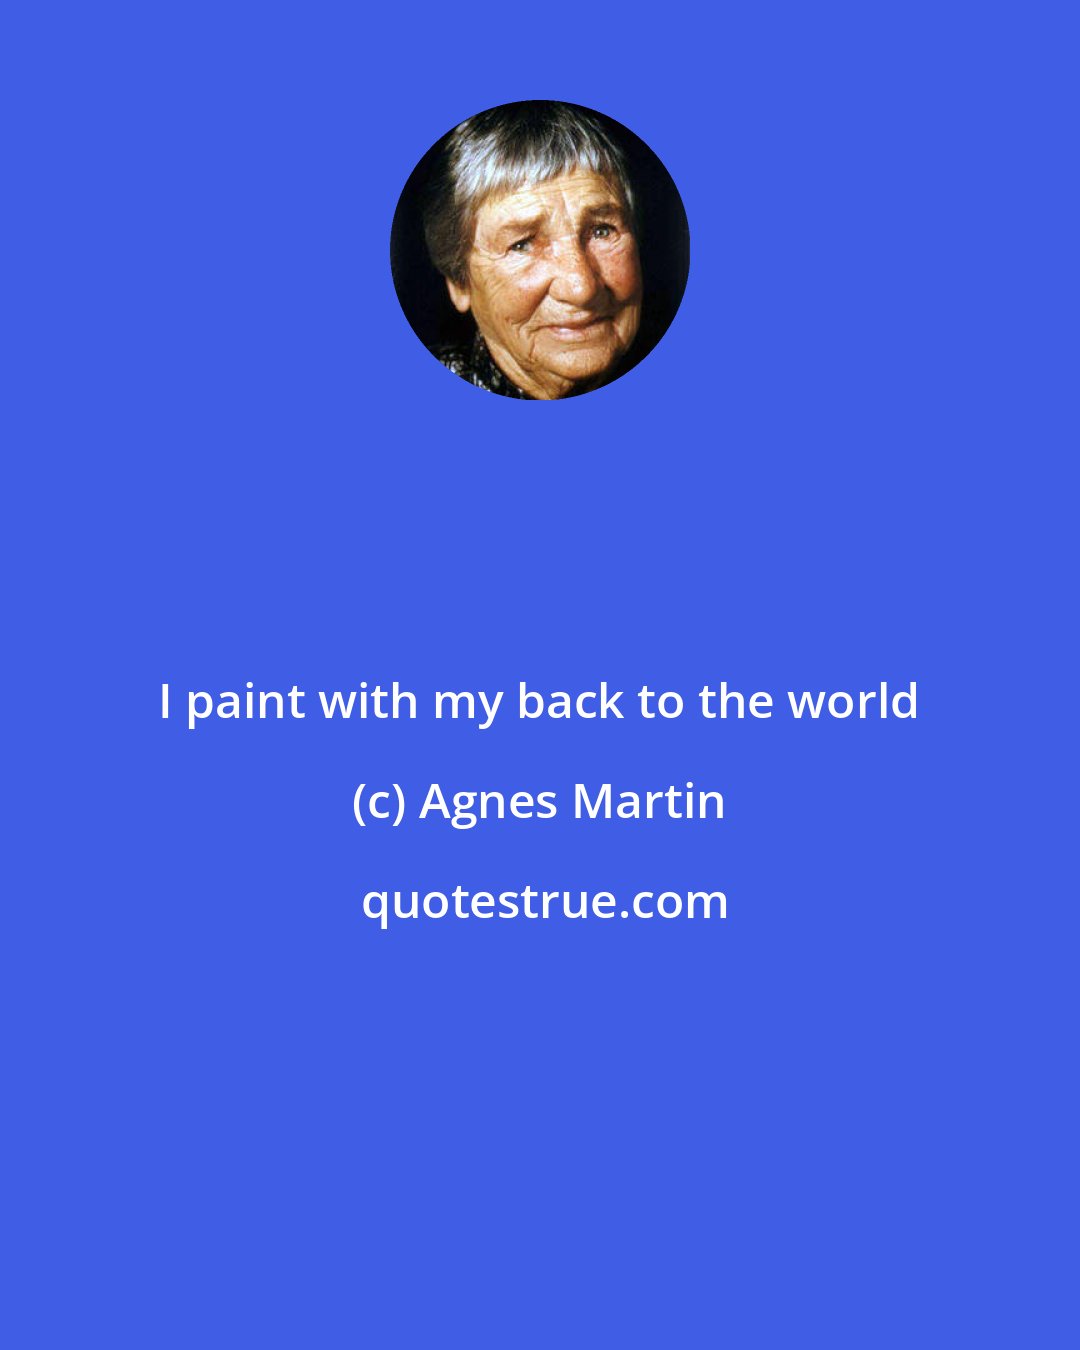 Agnes Martin: I paint with my back to the world